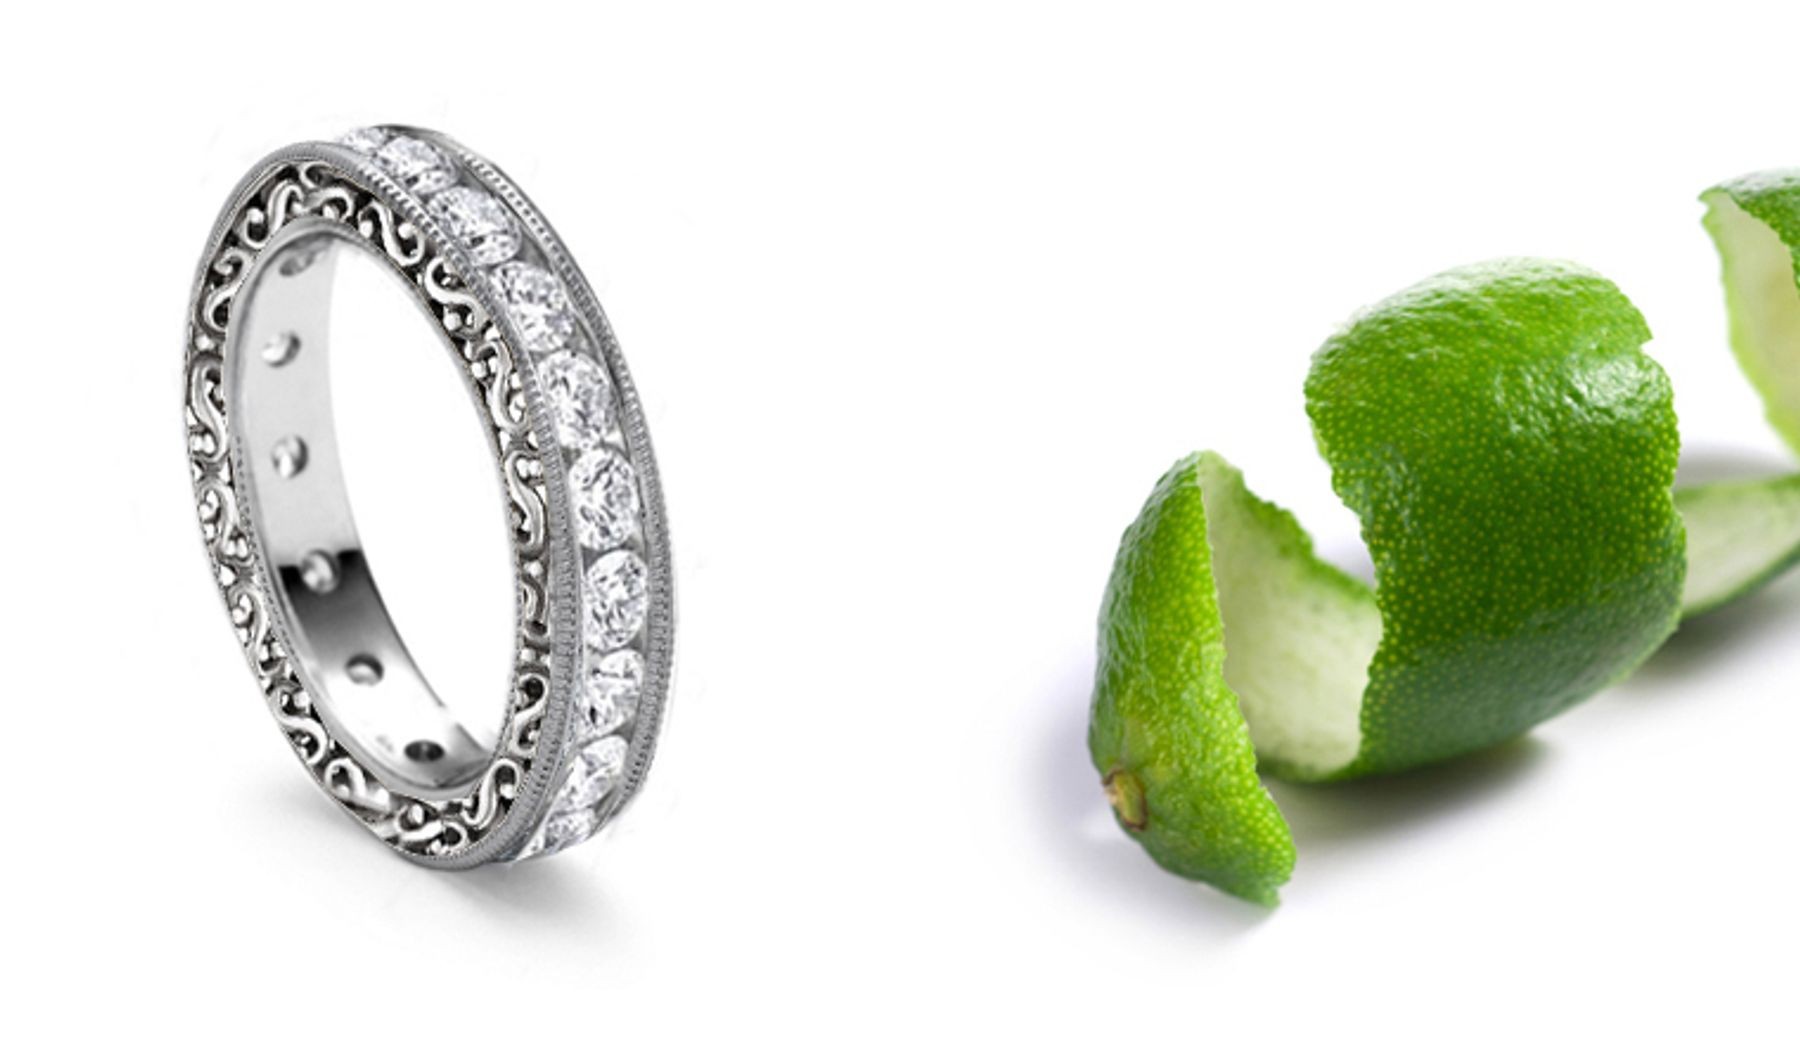 English Court of Henry: Platinum Ring Seamlessly-Set, Perfectly-Matched, Round Cut Diamonds and Engraved Shank Sides